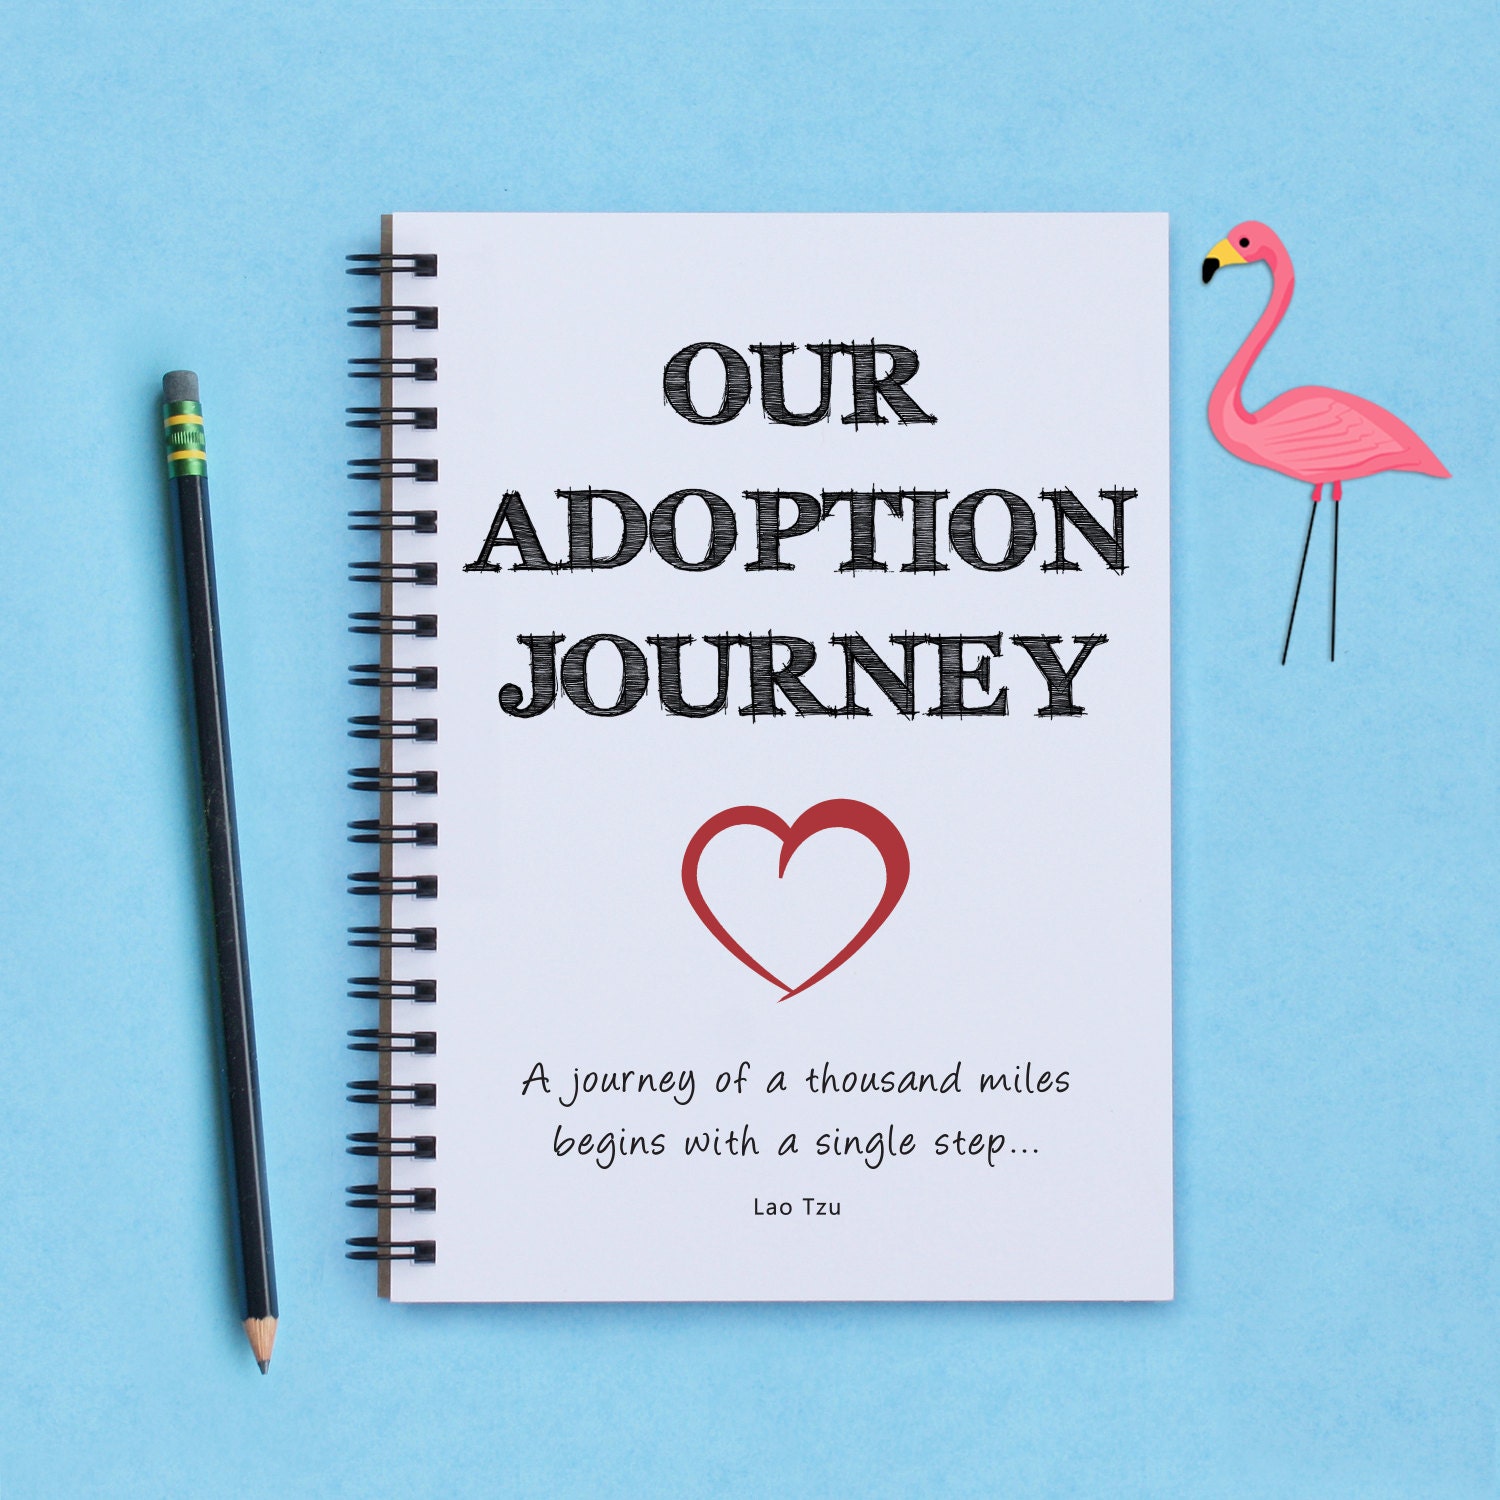 research articles on adoption